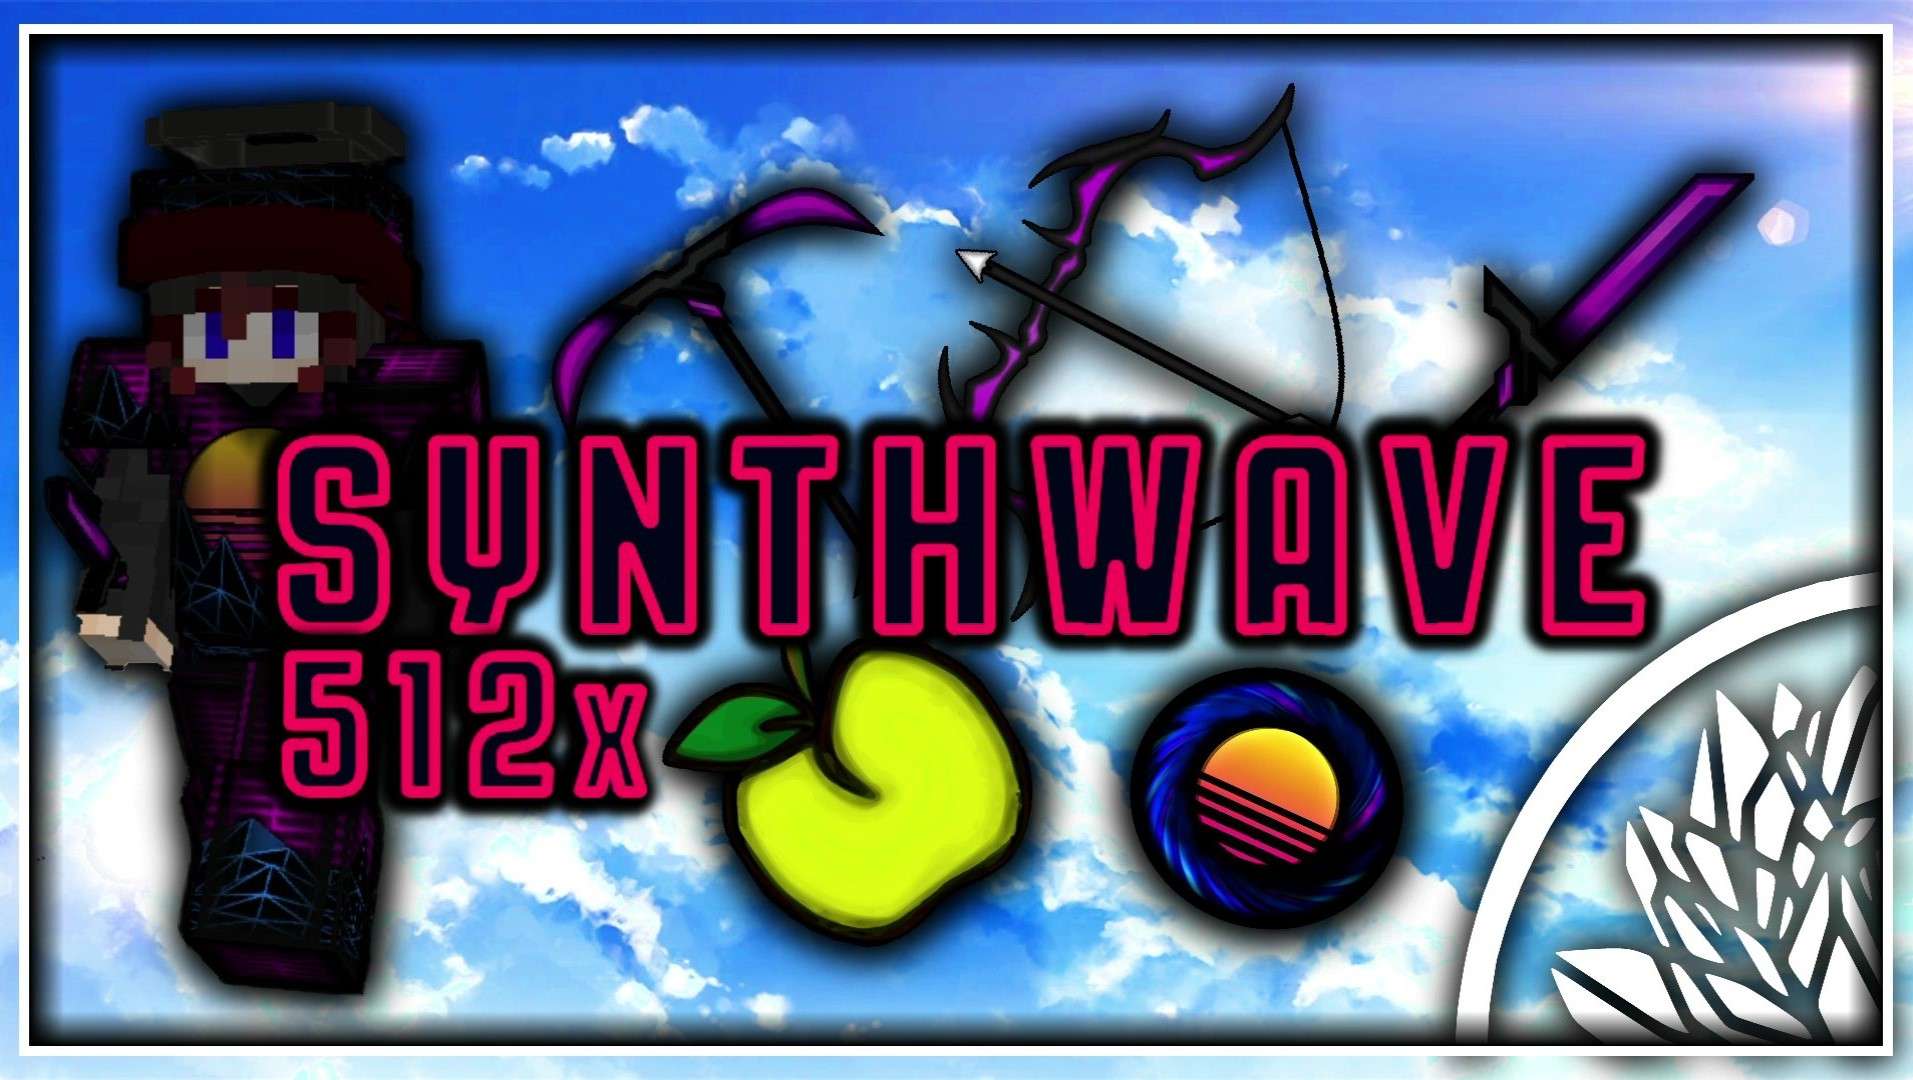 🔥 Synthwave Pack 512x by Moniia on PvPRP